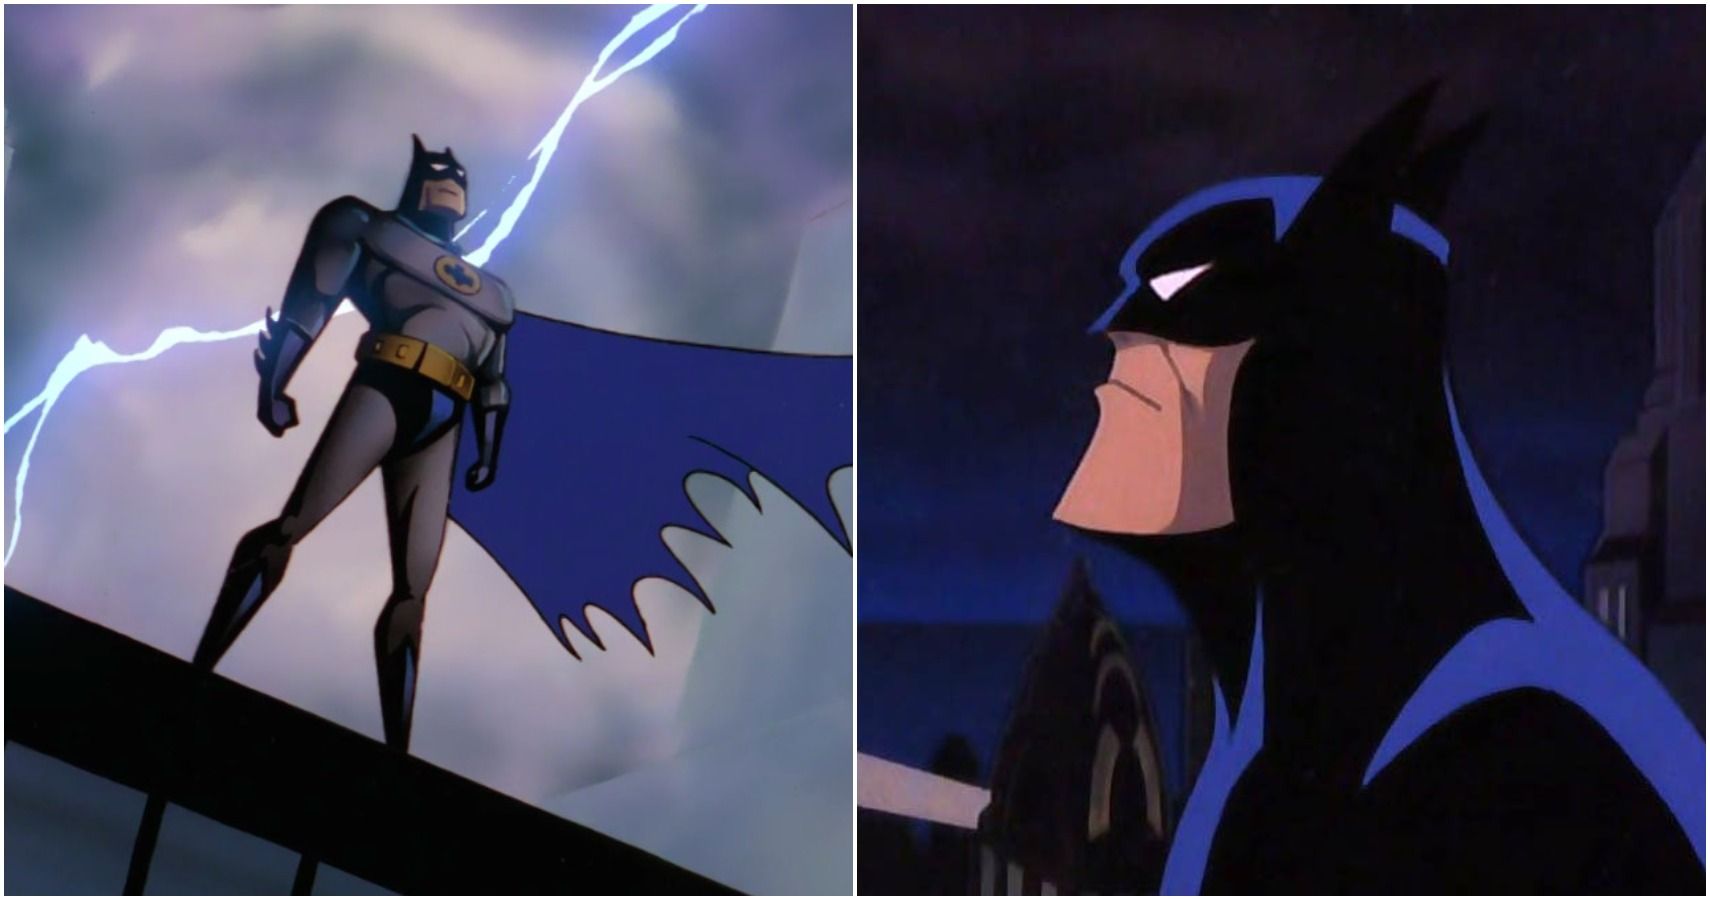 10 Best Episodes Of Batman: The Animated Series, According To IMDb